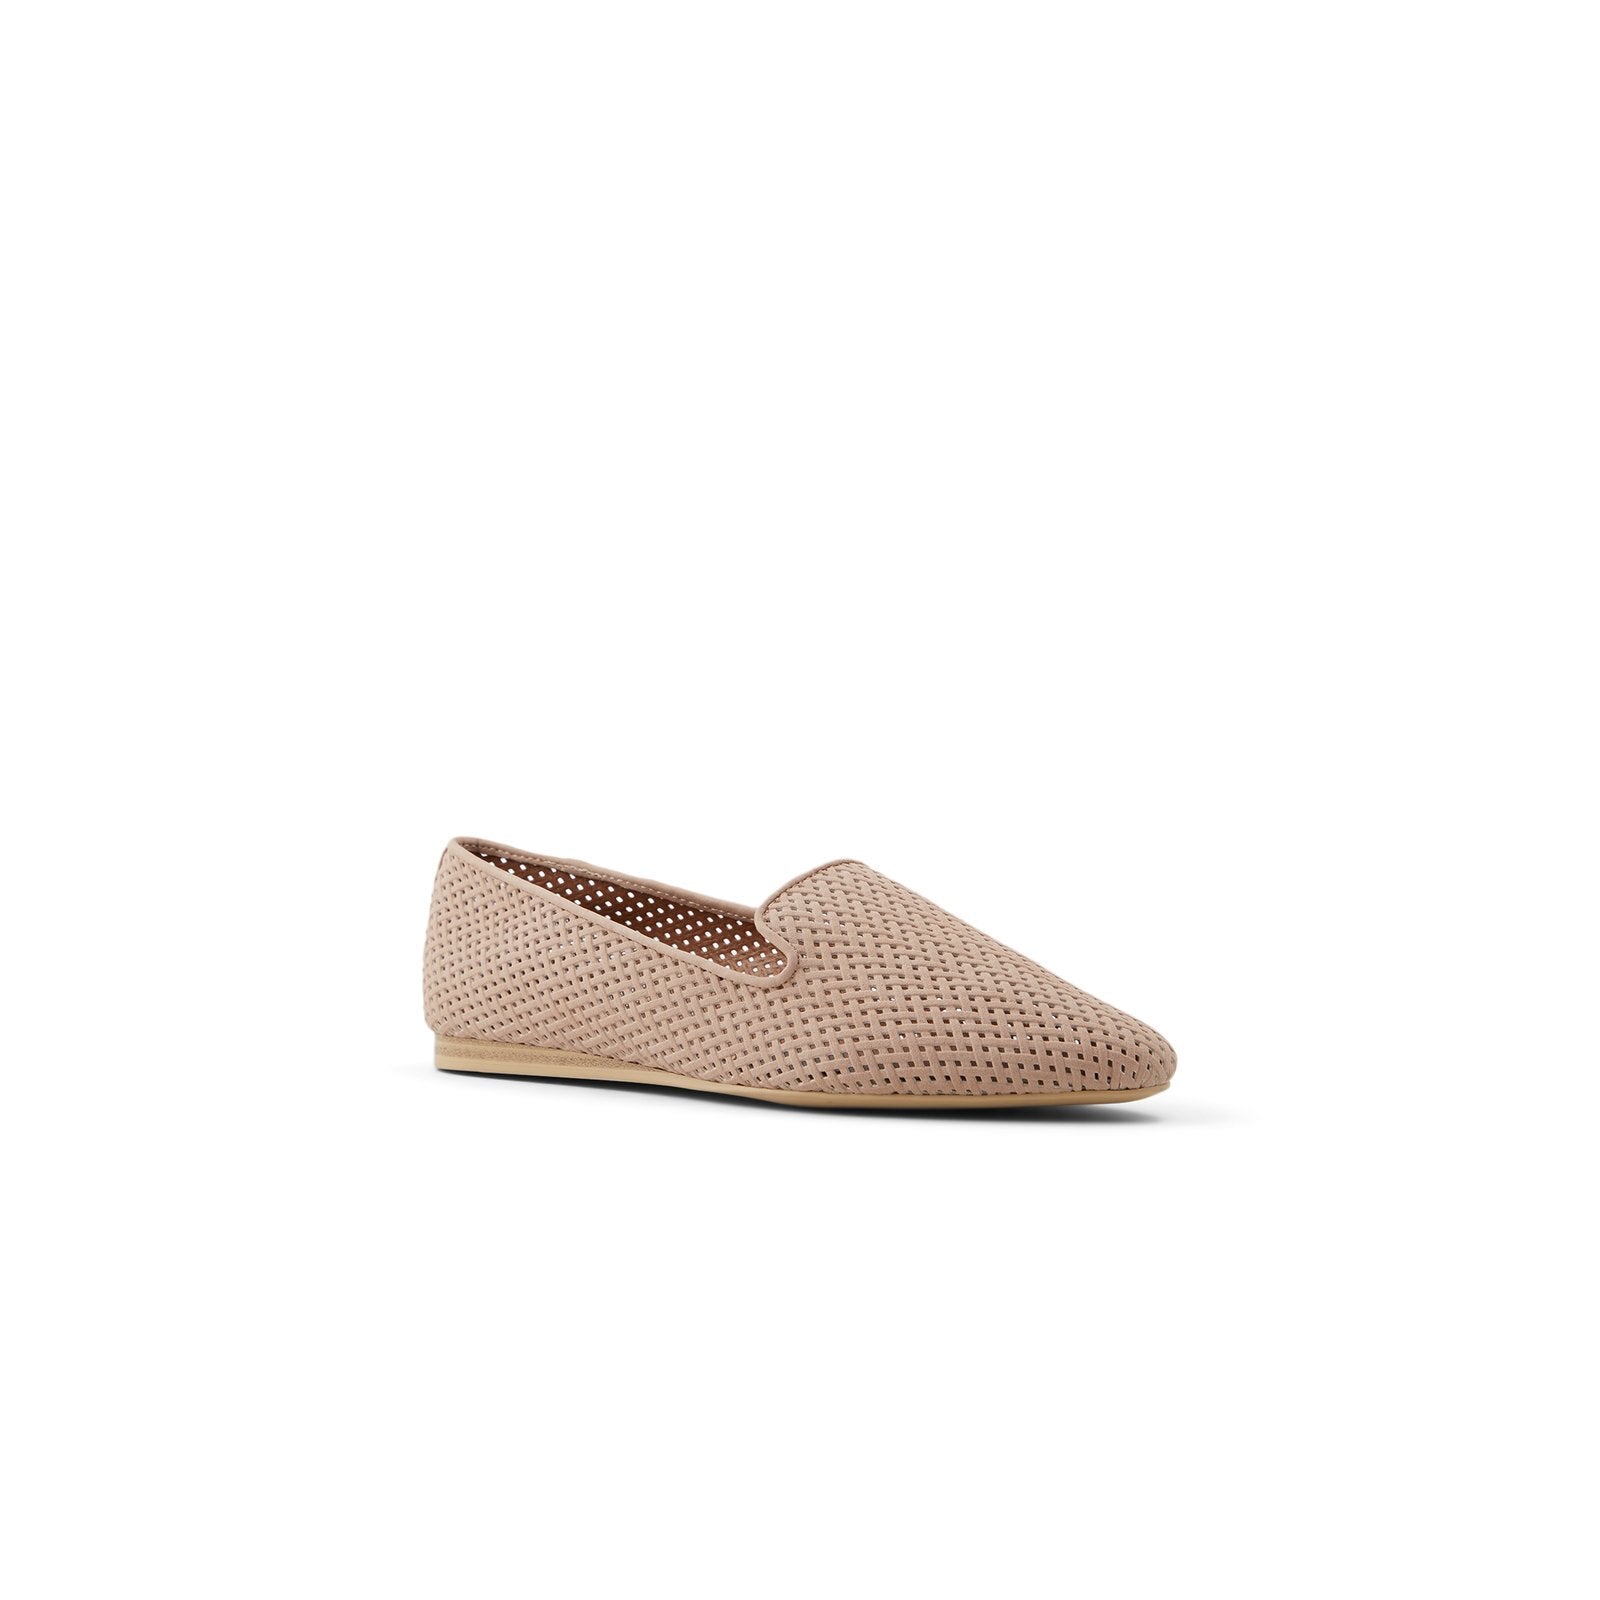 Marianah / Loafers Women Shoes - LIGHT PINK - CALL IT SPRING KSA